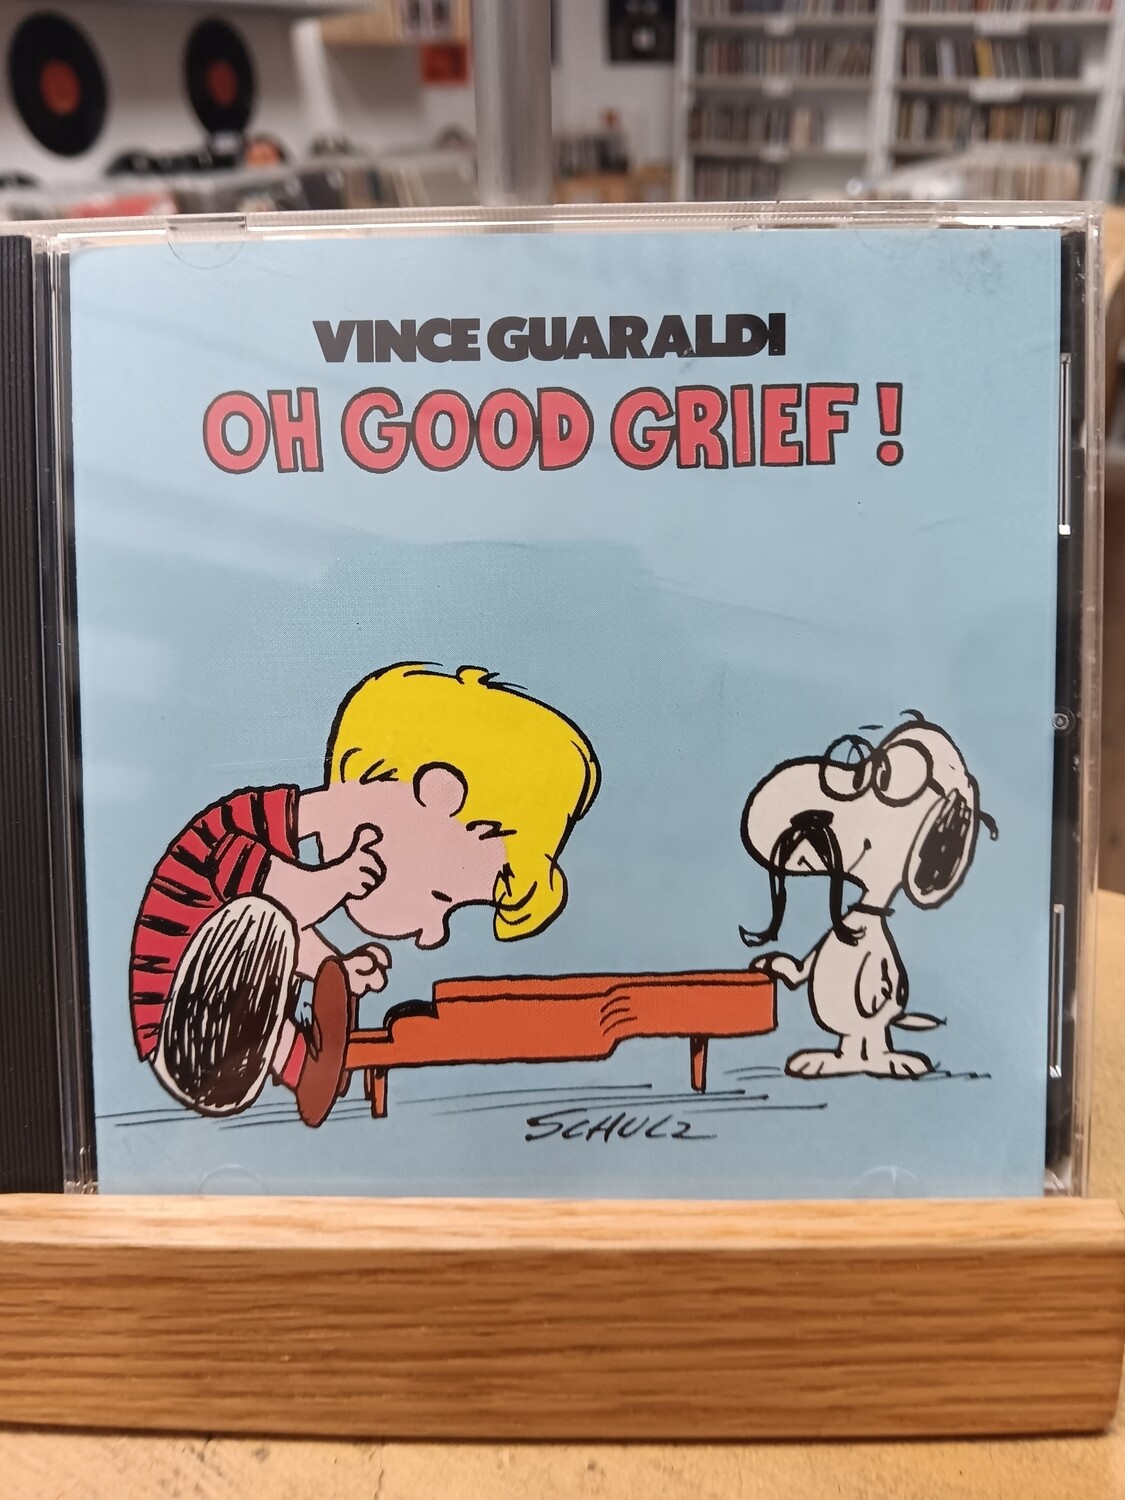 VINCE GUARALDI - Oh good grief (CD)